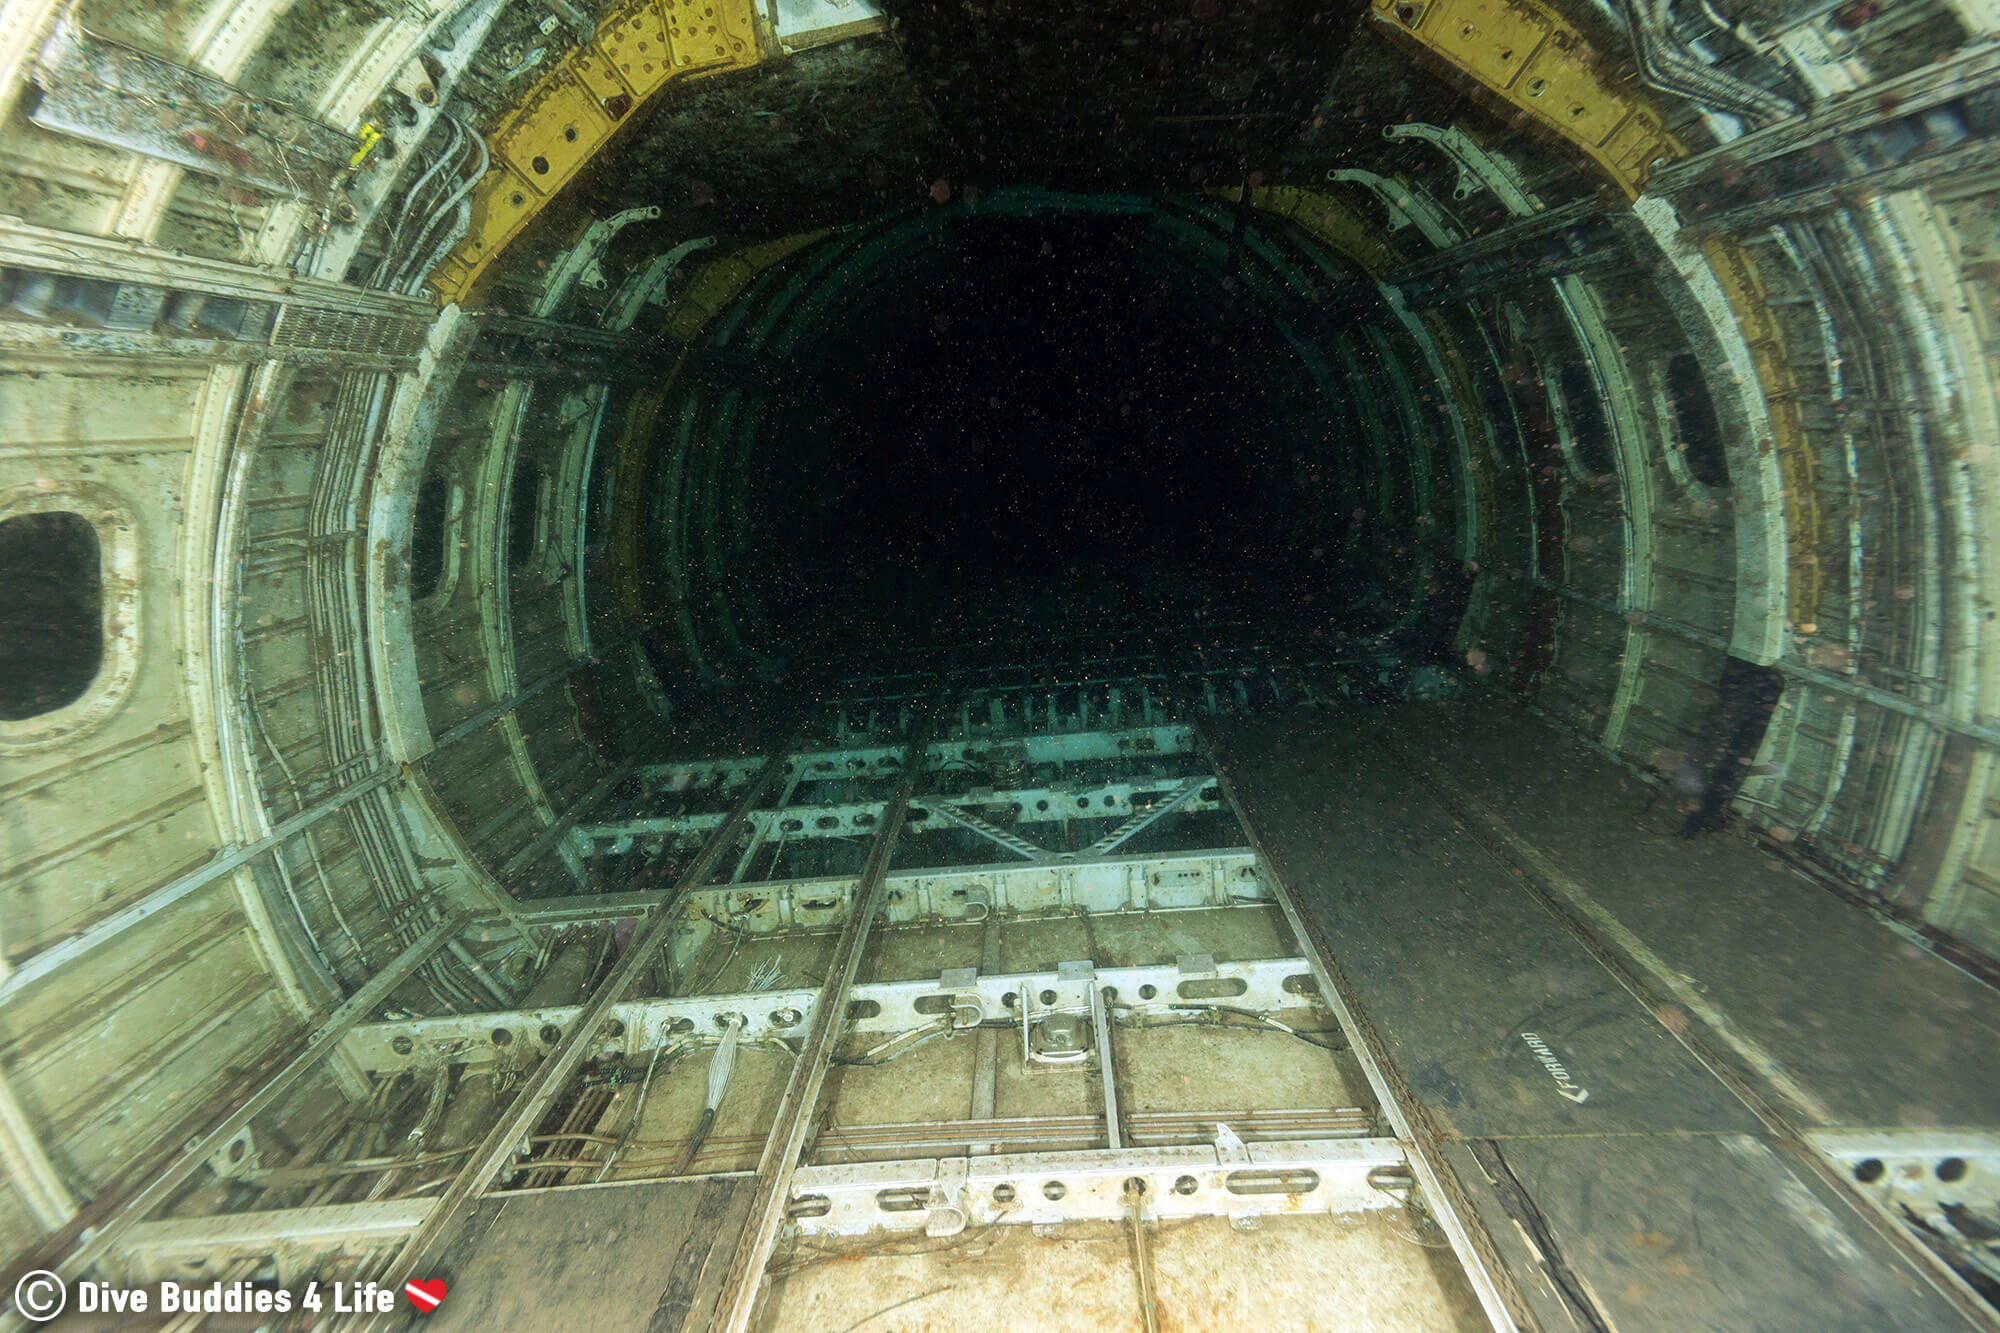 Inside Of The Cargo Hold Of The Sunken Chepstow Airplane, Wales, UK